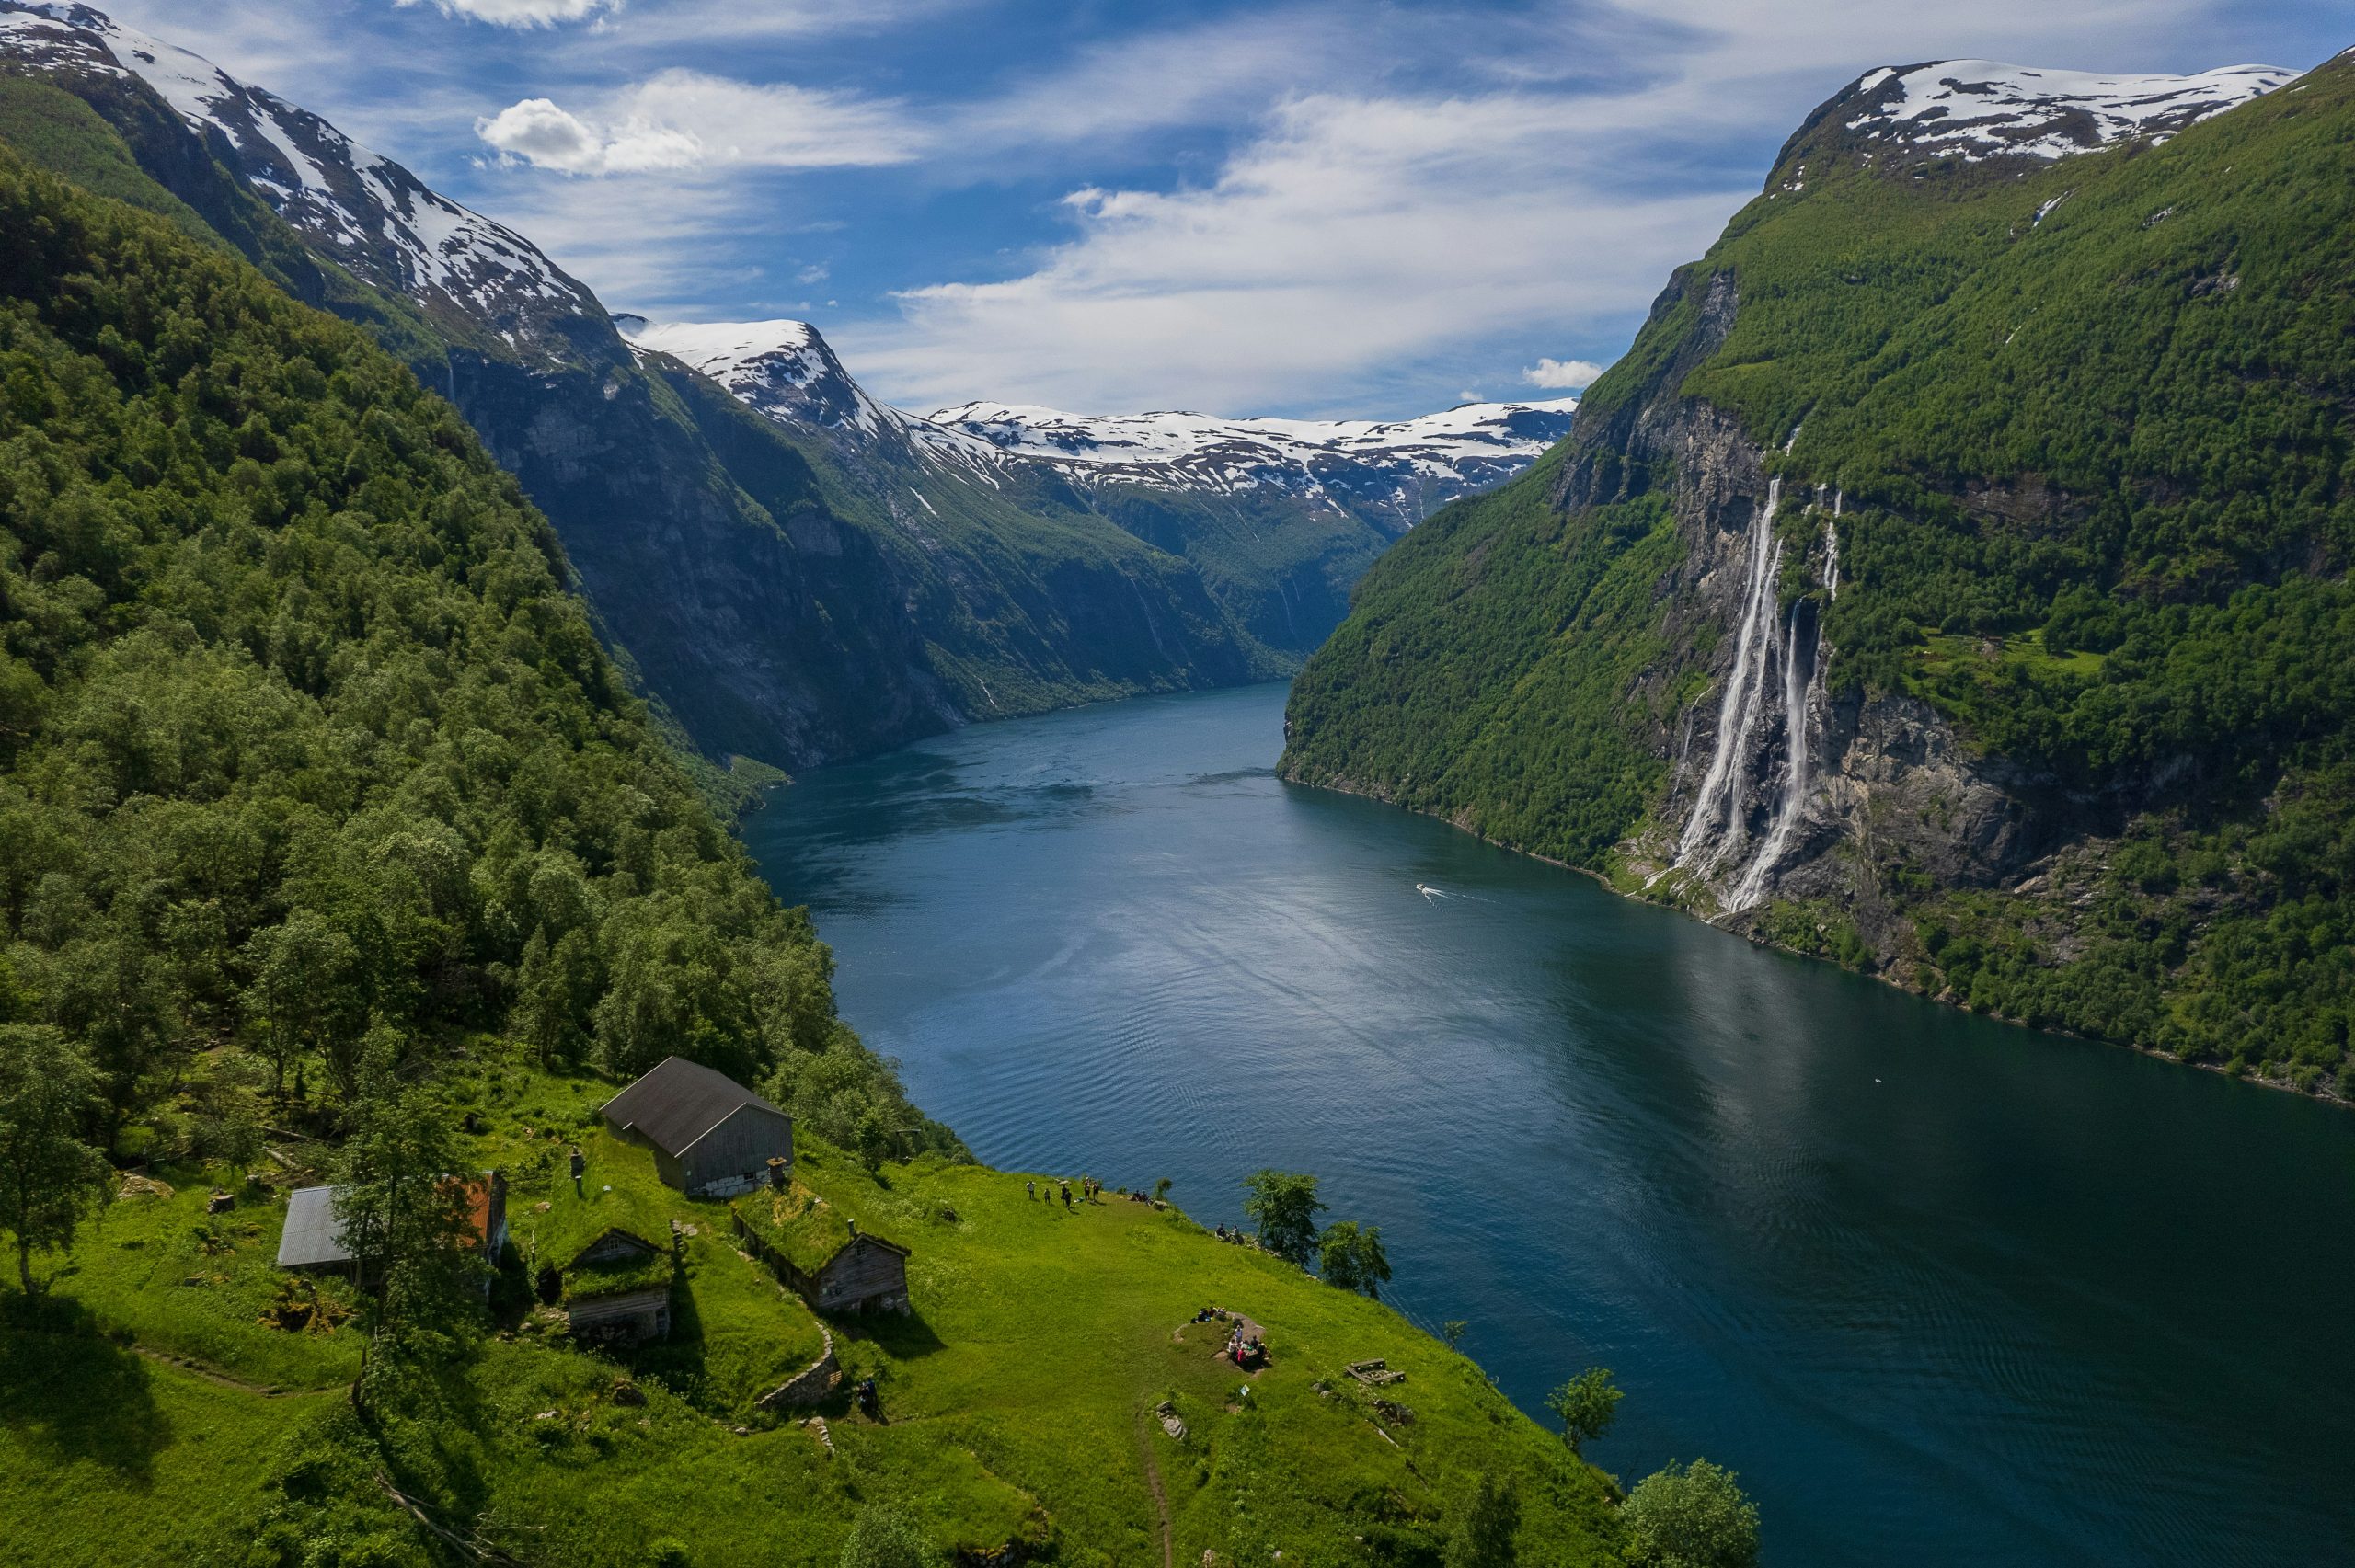 discover the breathtaking beauty of norwegian fjords, with their majestic cliffs, crystal-clear waters, and pristine natural surroundings.